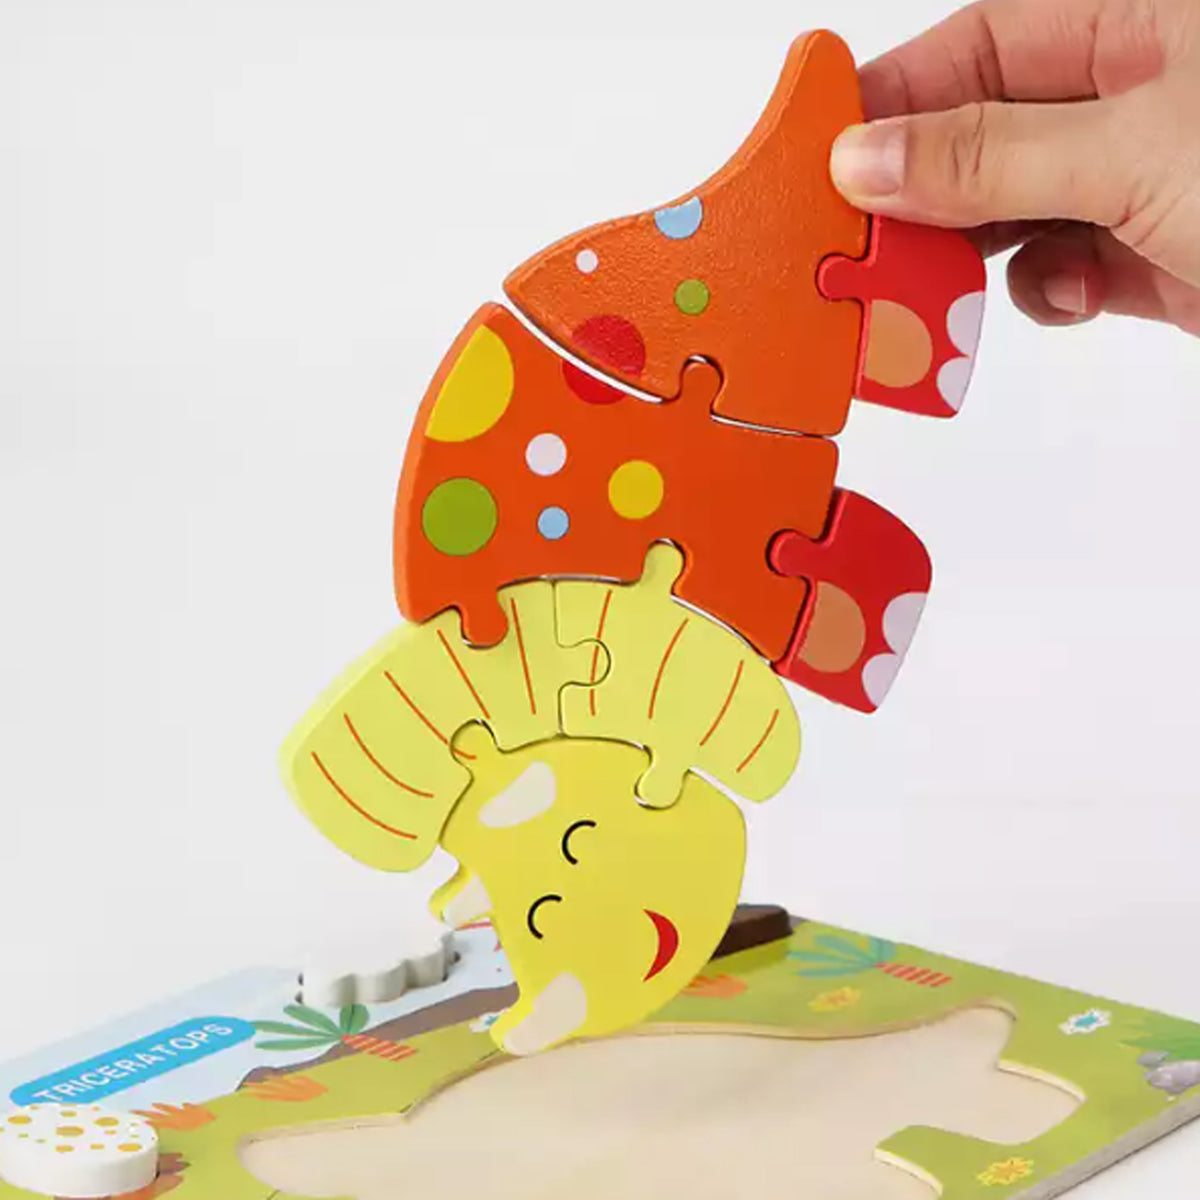 Early Education Puzzle Toys